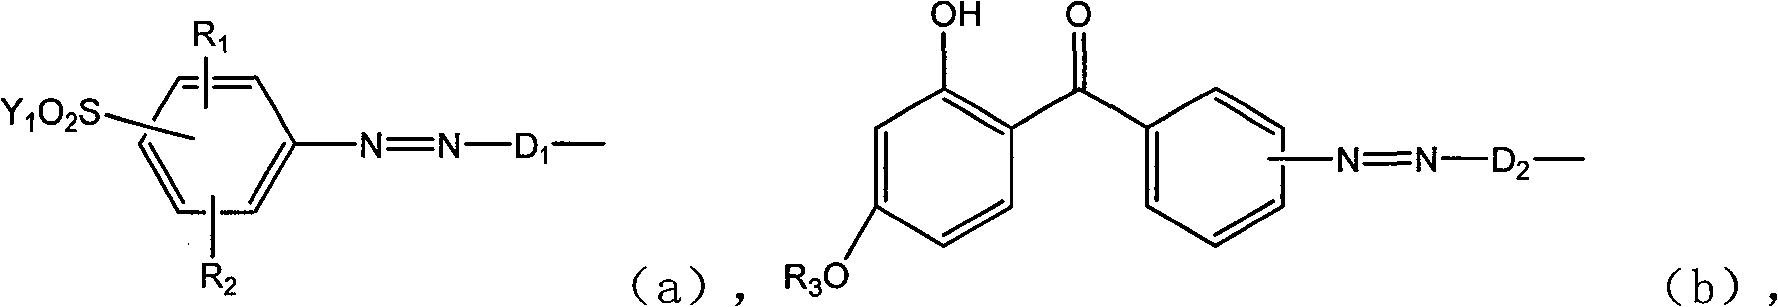 Active dye containing ultraviolet absorbing groups